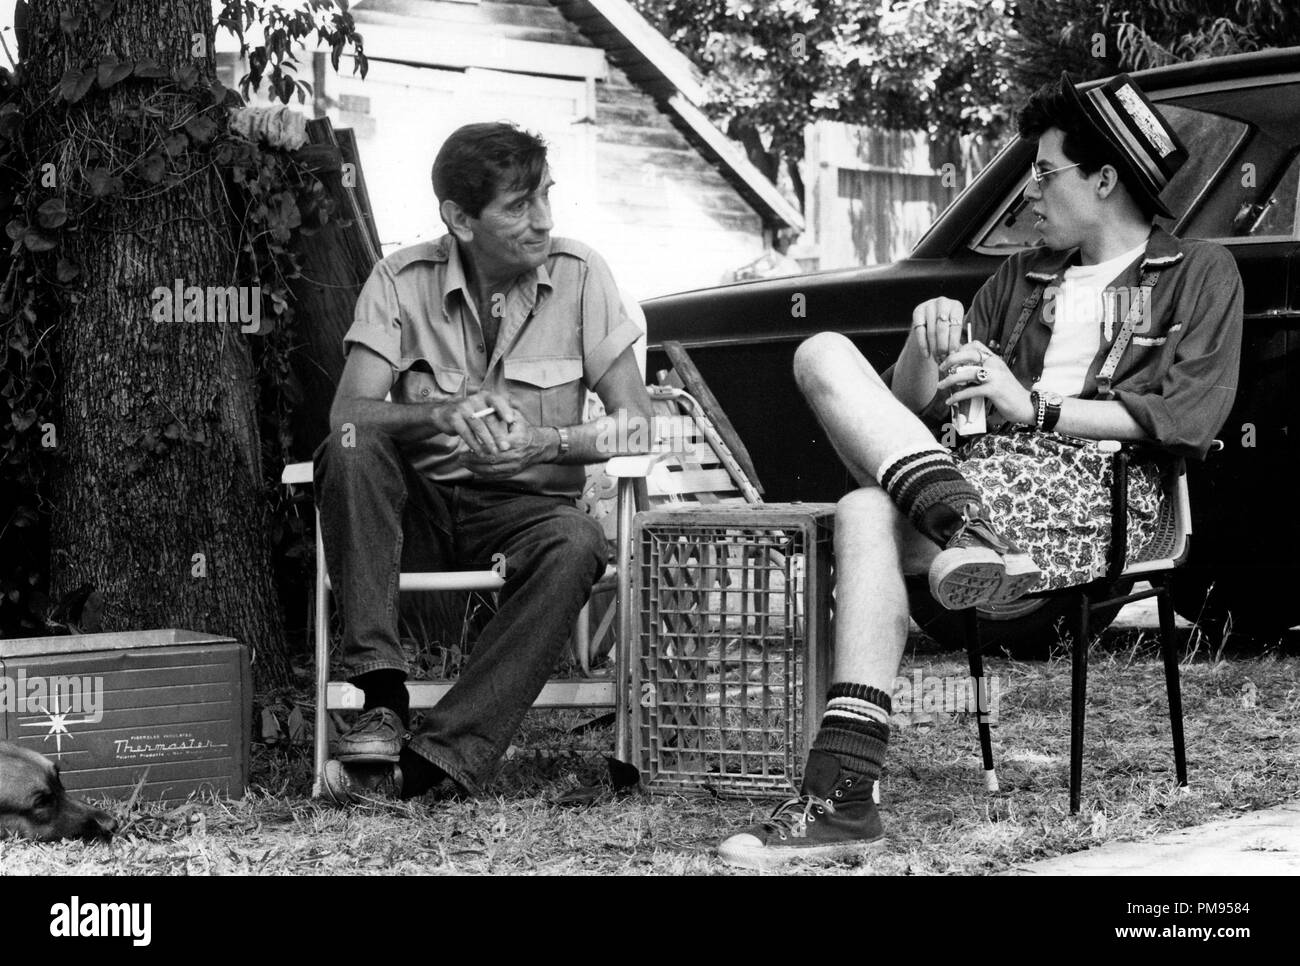 Studio Publicity Still from "Pretty in Pink" Harry Dean Stanton, Jon Cryer  © 1986 Paramount Pictures All Rights Reserved File Reference # 31700150THA  For Editorial Use Only Stock Photo - Alamy